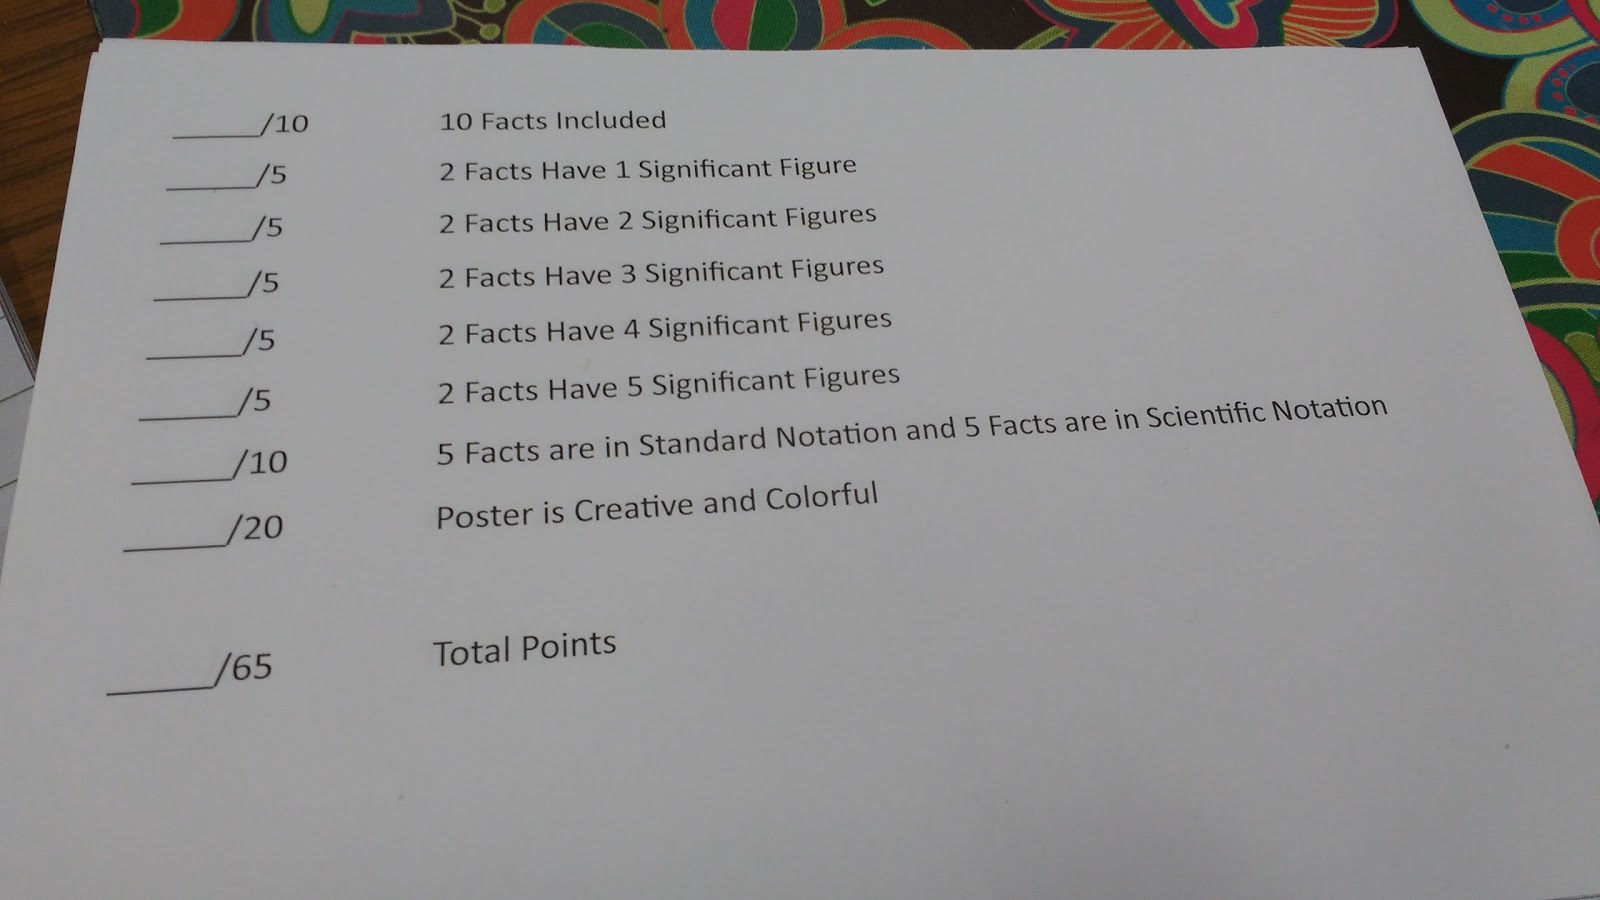 Rubric for Significant Figures Poster Project